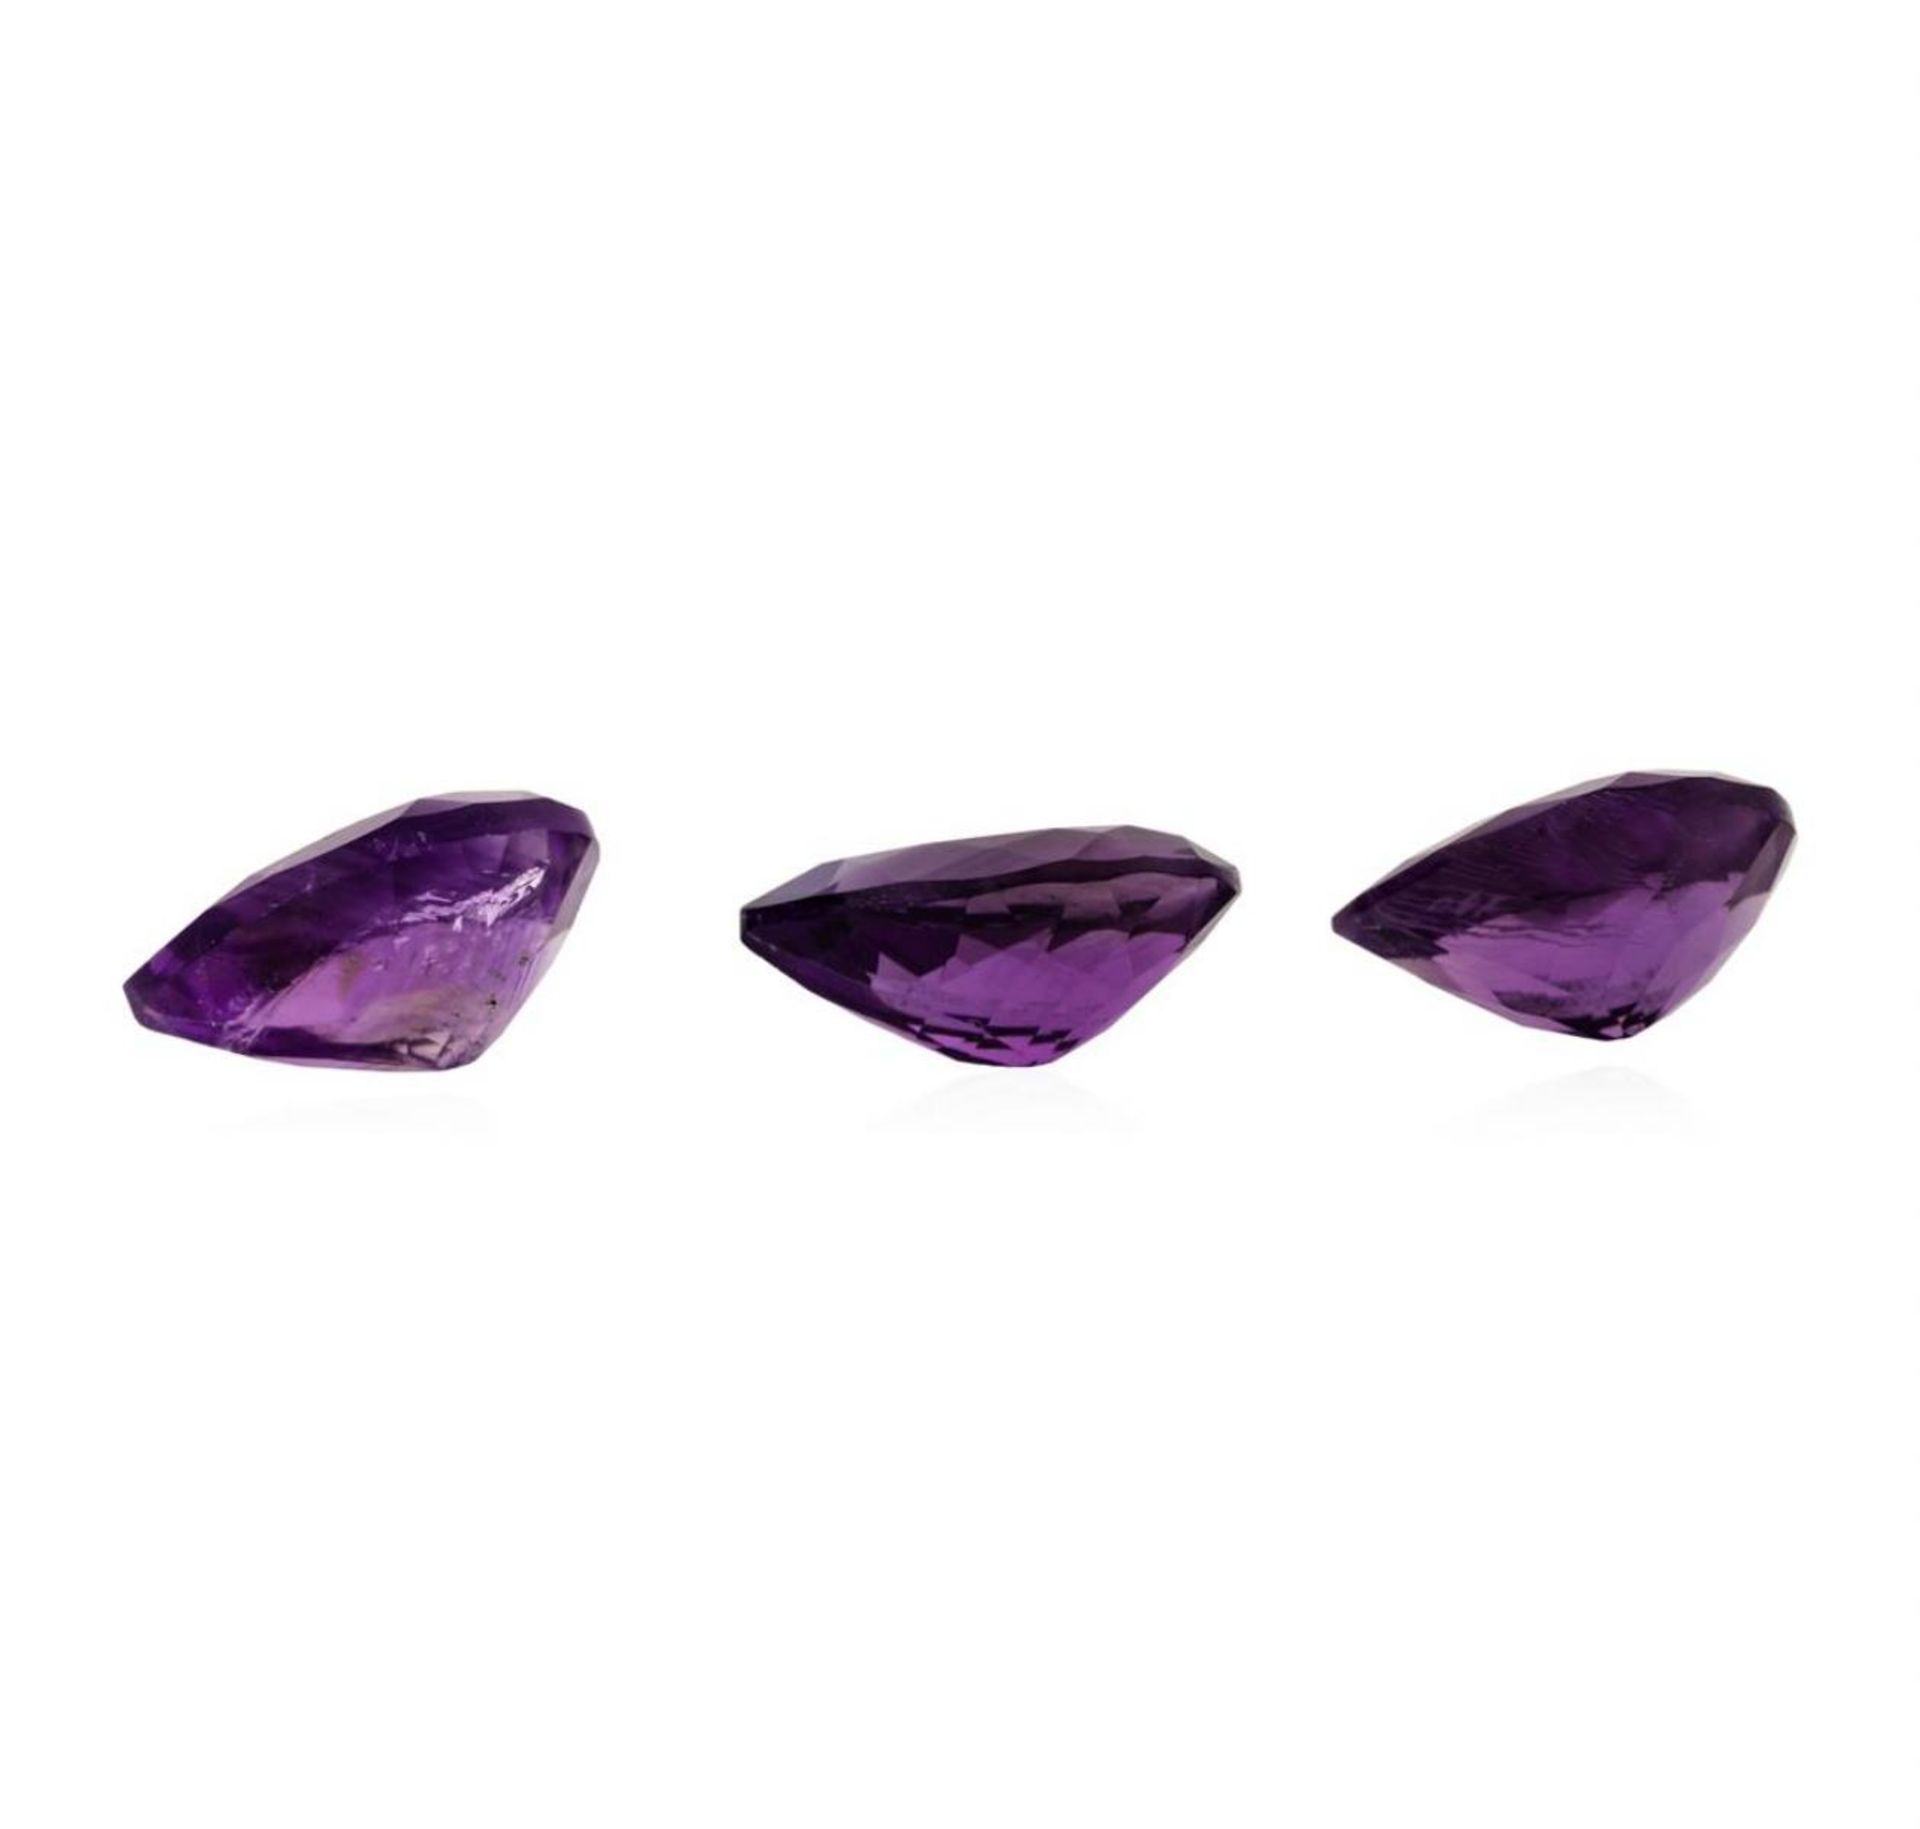 21.14 ctw.Natural Pear Cut Amethyst Parcel of Three - Image 2 of 3